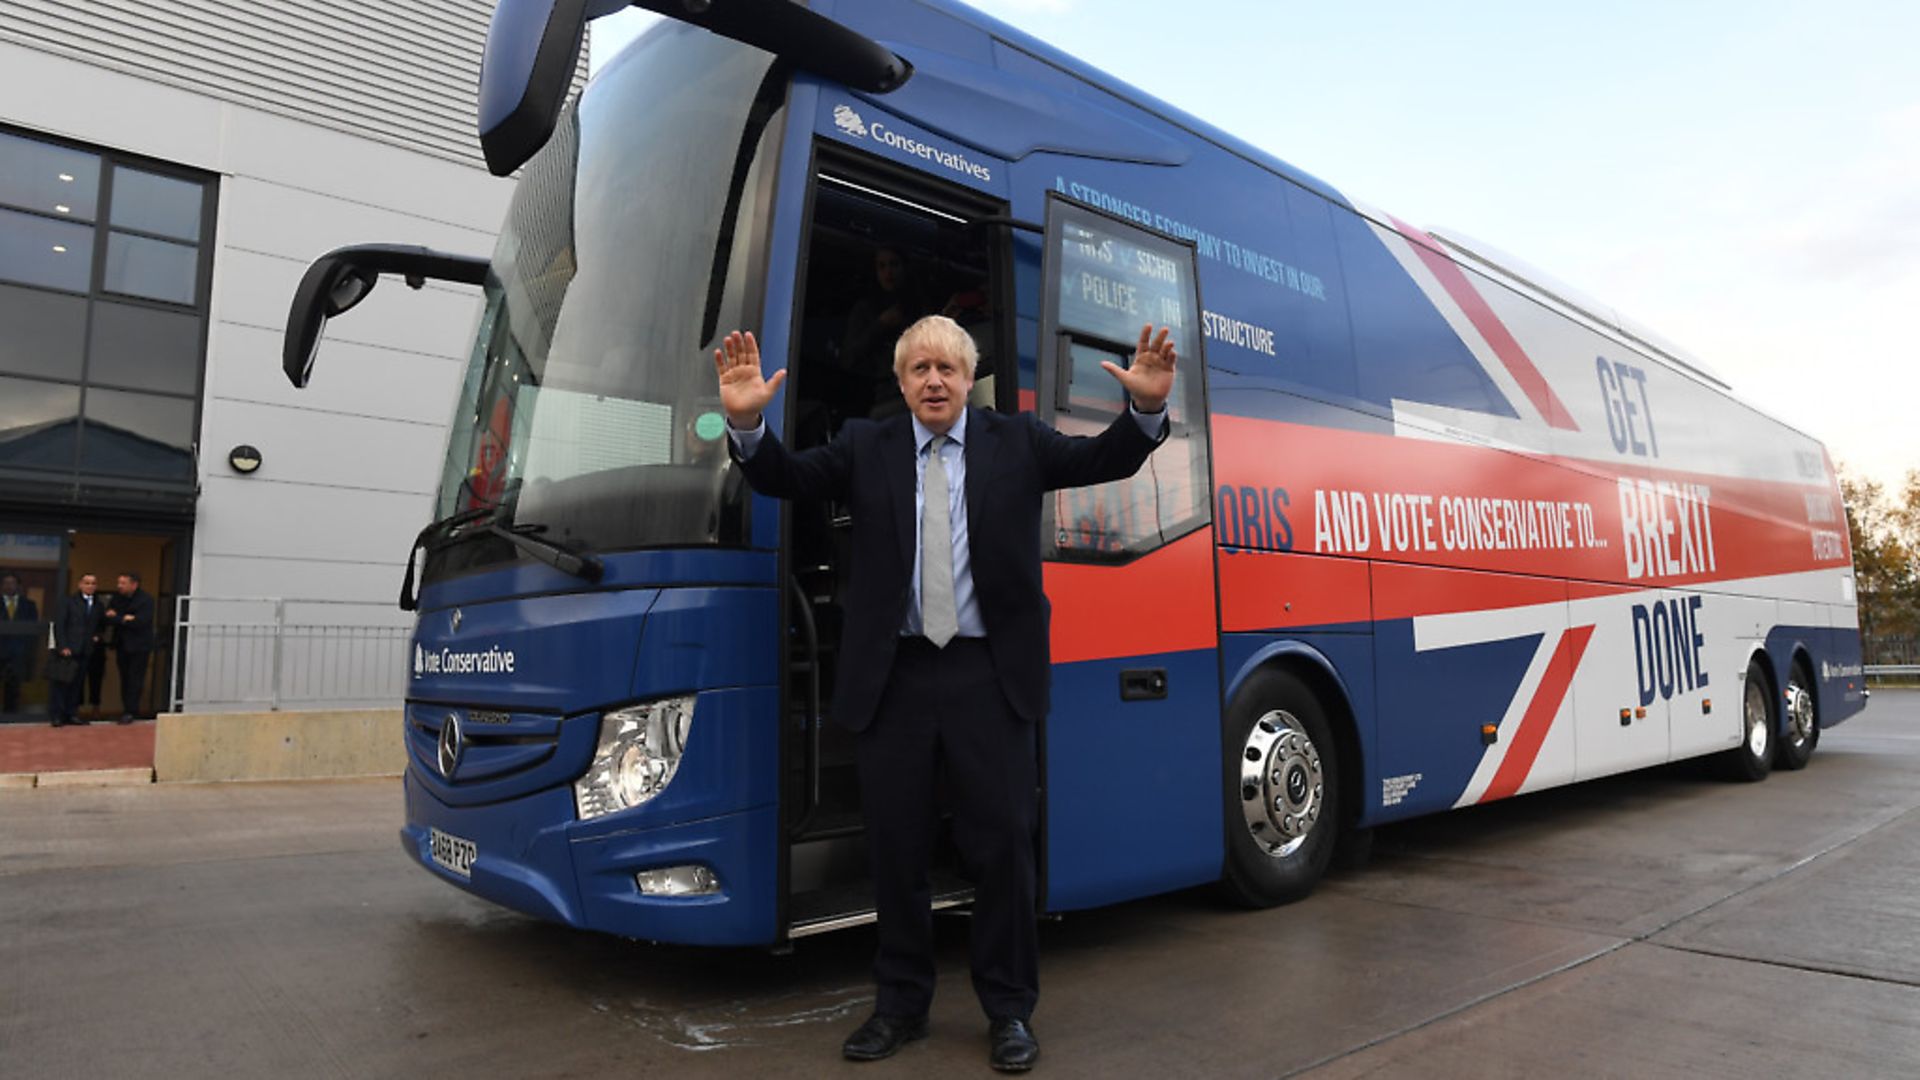 The Conservative Party campaign bus. Photo: Stefan Rousseau / PA - Credit: PA Wire/PA Images